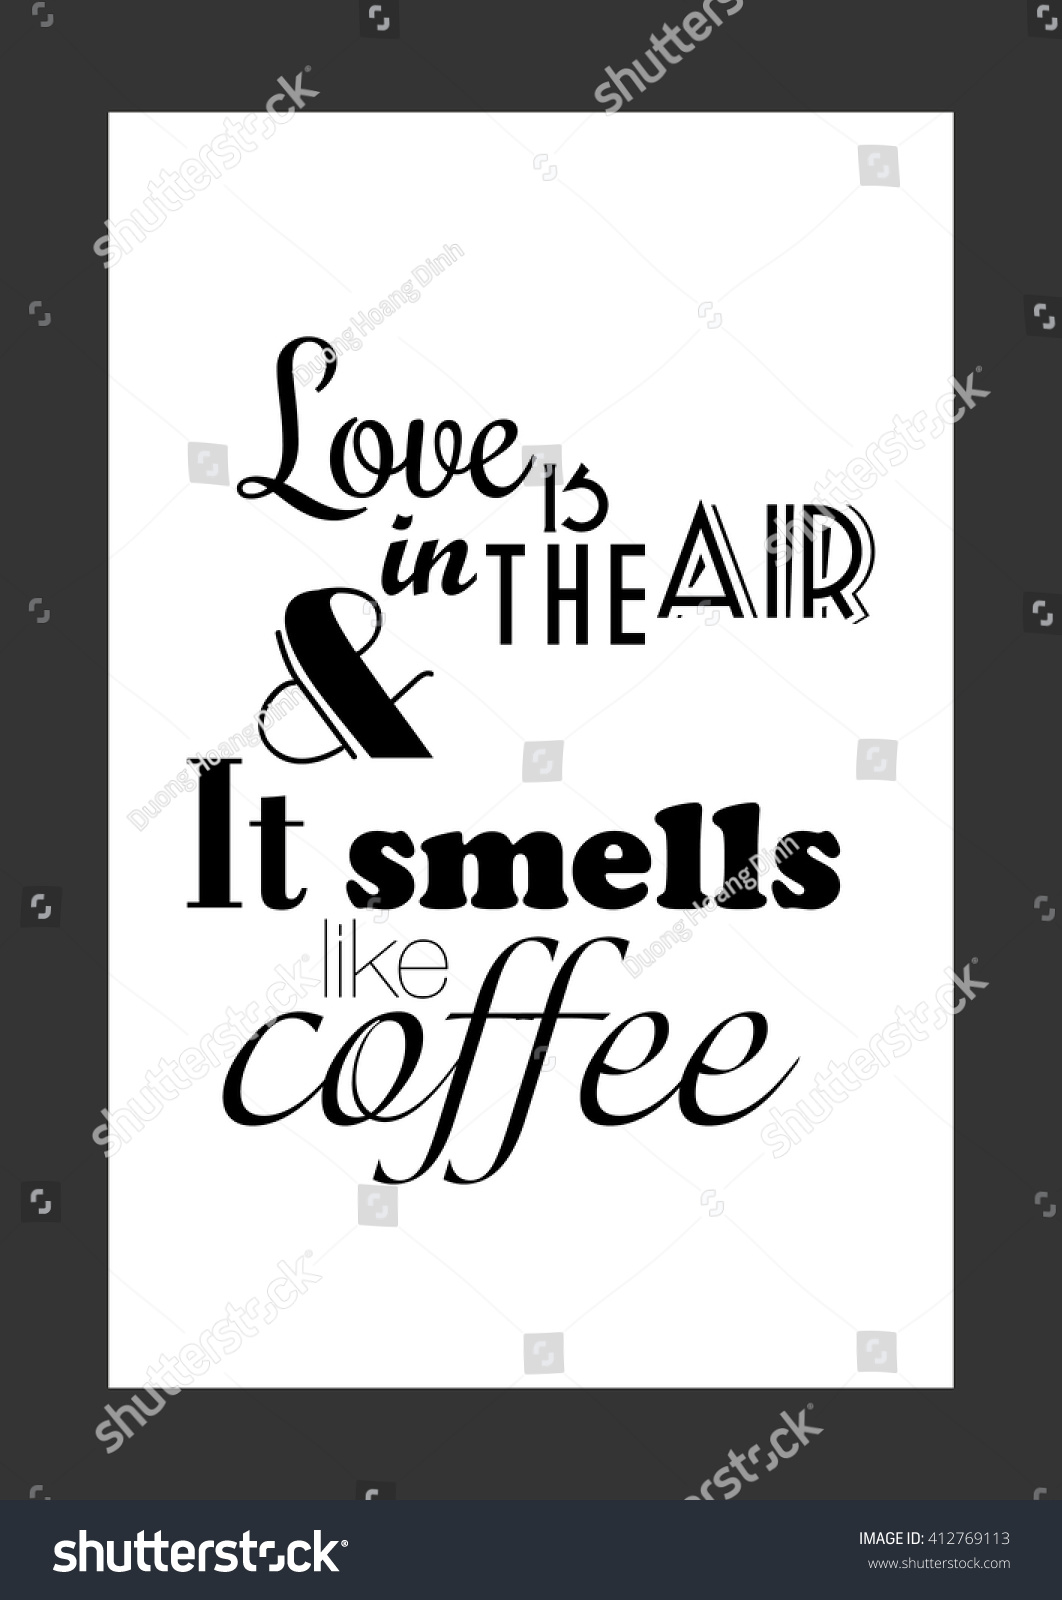 Coffee quote Love is in the air and it smells like coffee